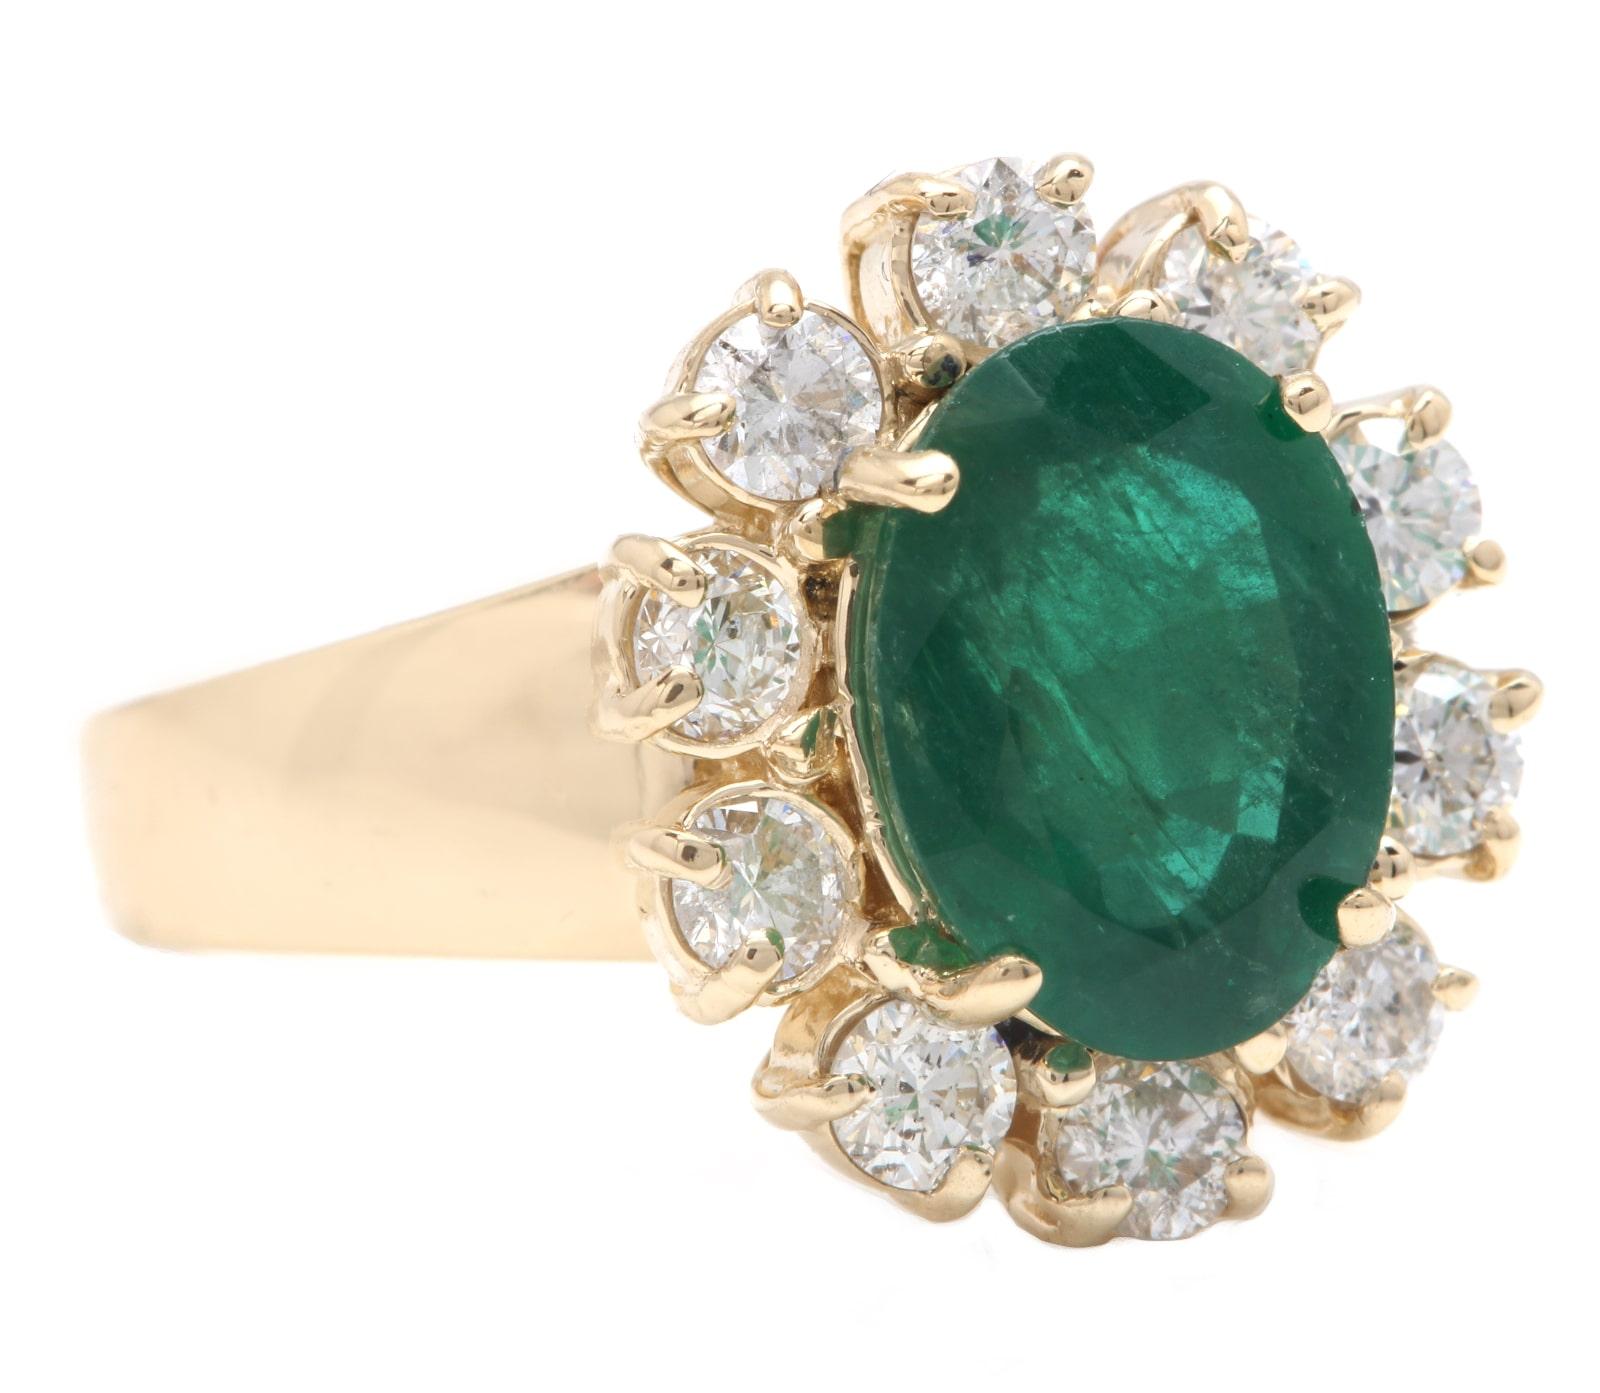 4.40 Carats Natural Emerald and Diamond 14K Solid Yellow Gold Ring

Suggested Replacement Value: $7,500.00

Total Natural Green Emerald Weight is: Approx. 3.30 Carats (transparent)

Emerald Treatment: Oiling  

Emerald Measures: 10 x 8 mm

Natural